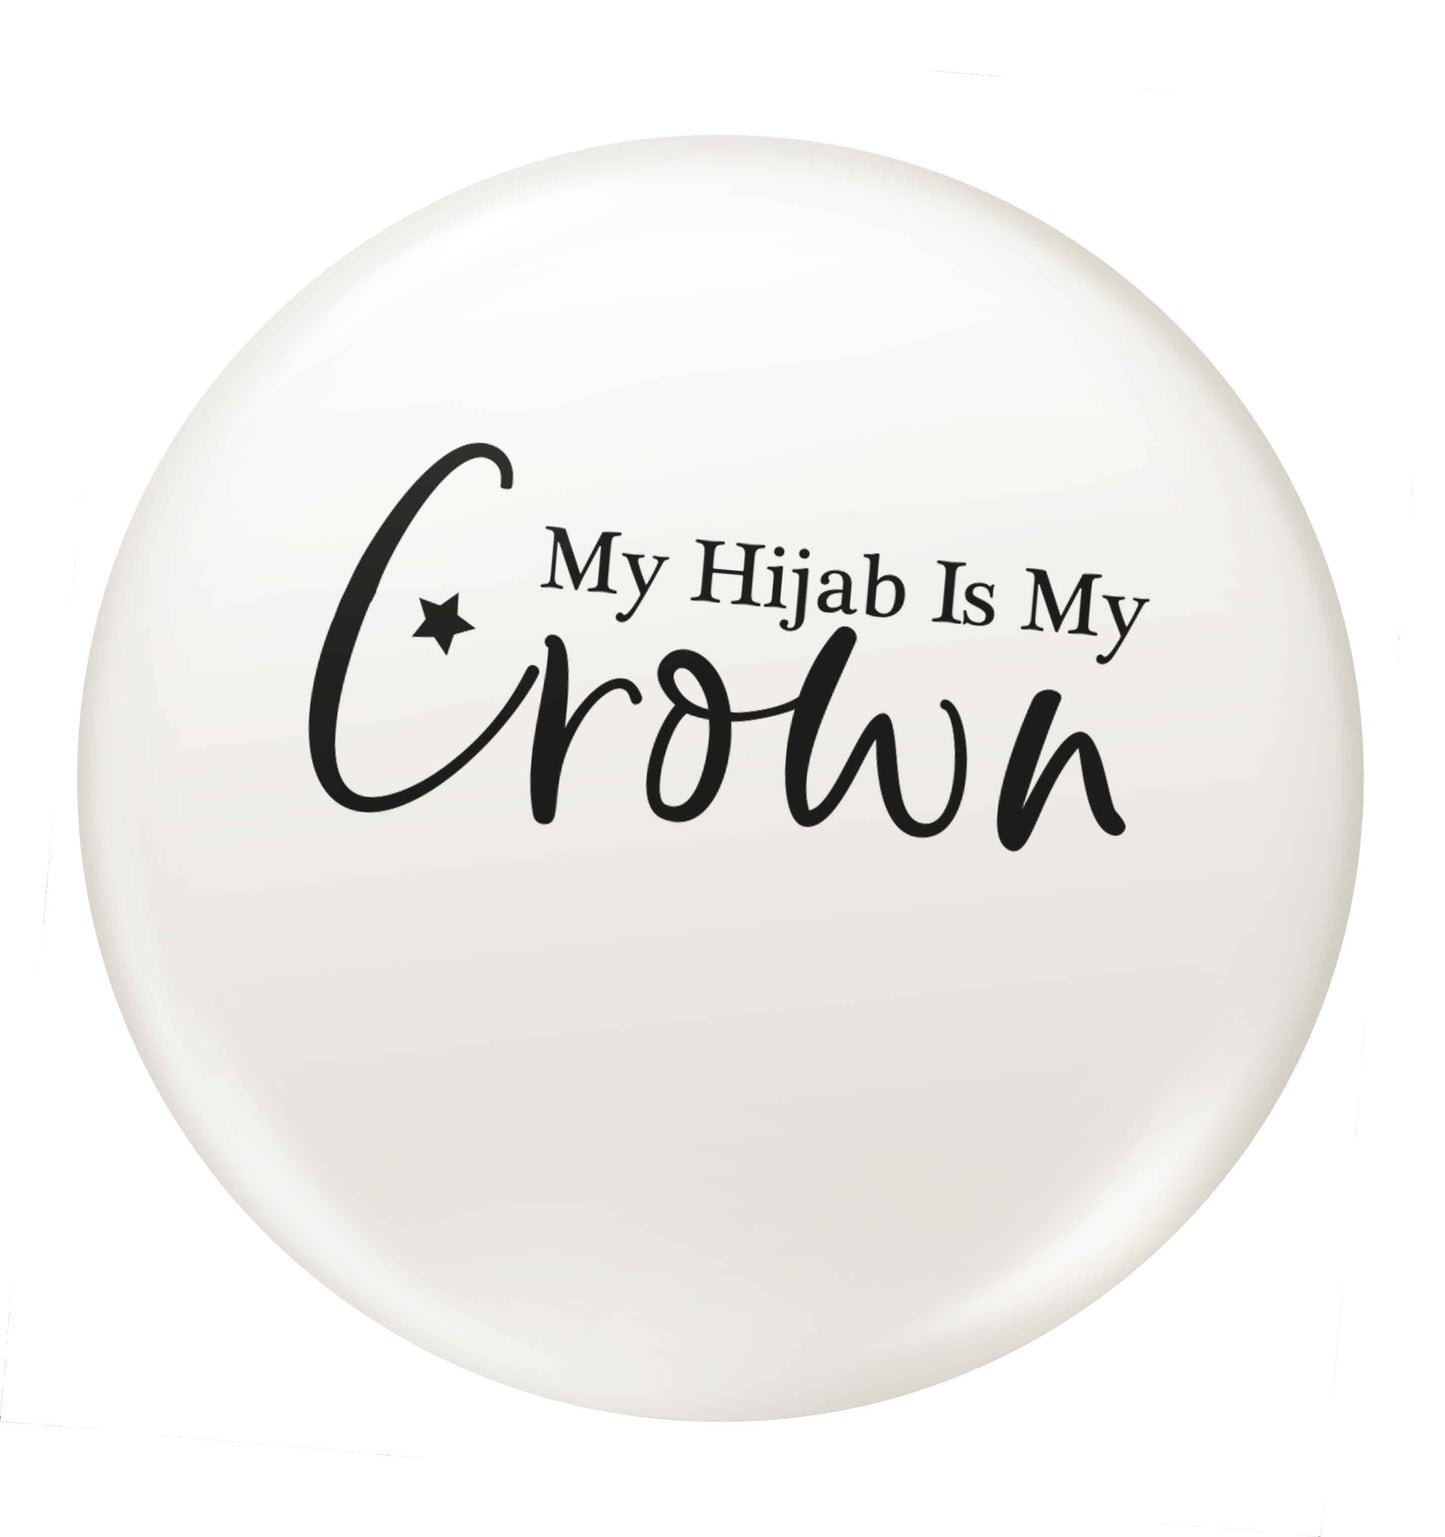 My hijab is my crown small 25mm Pin badge